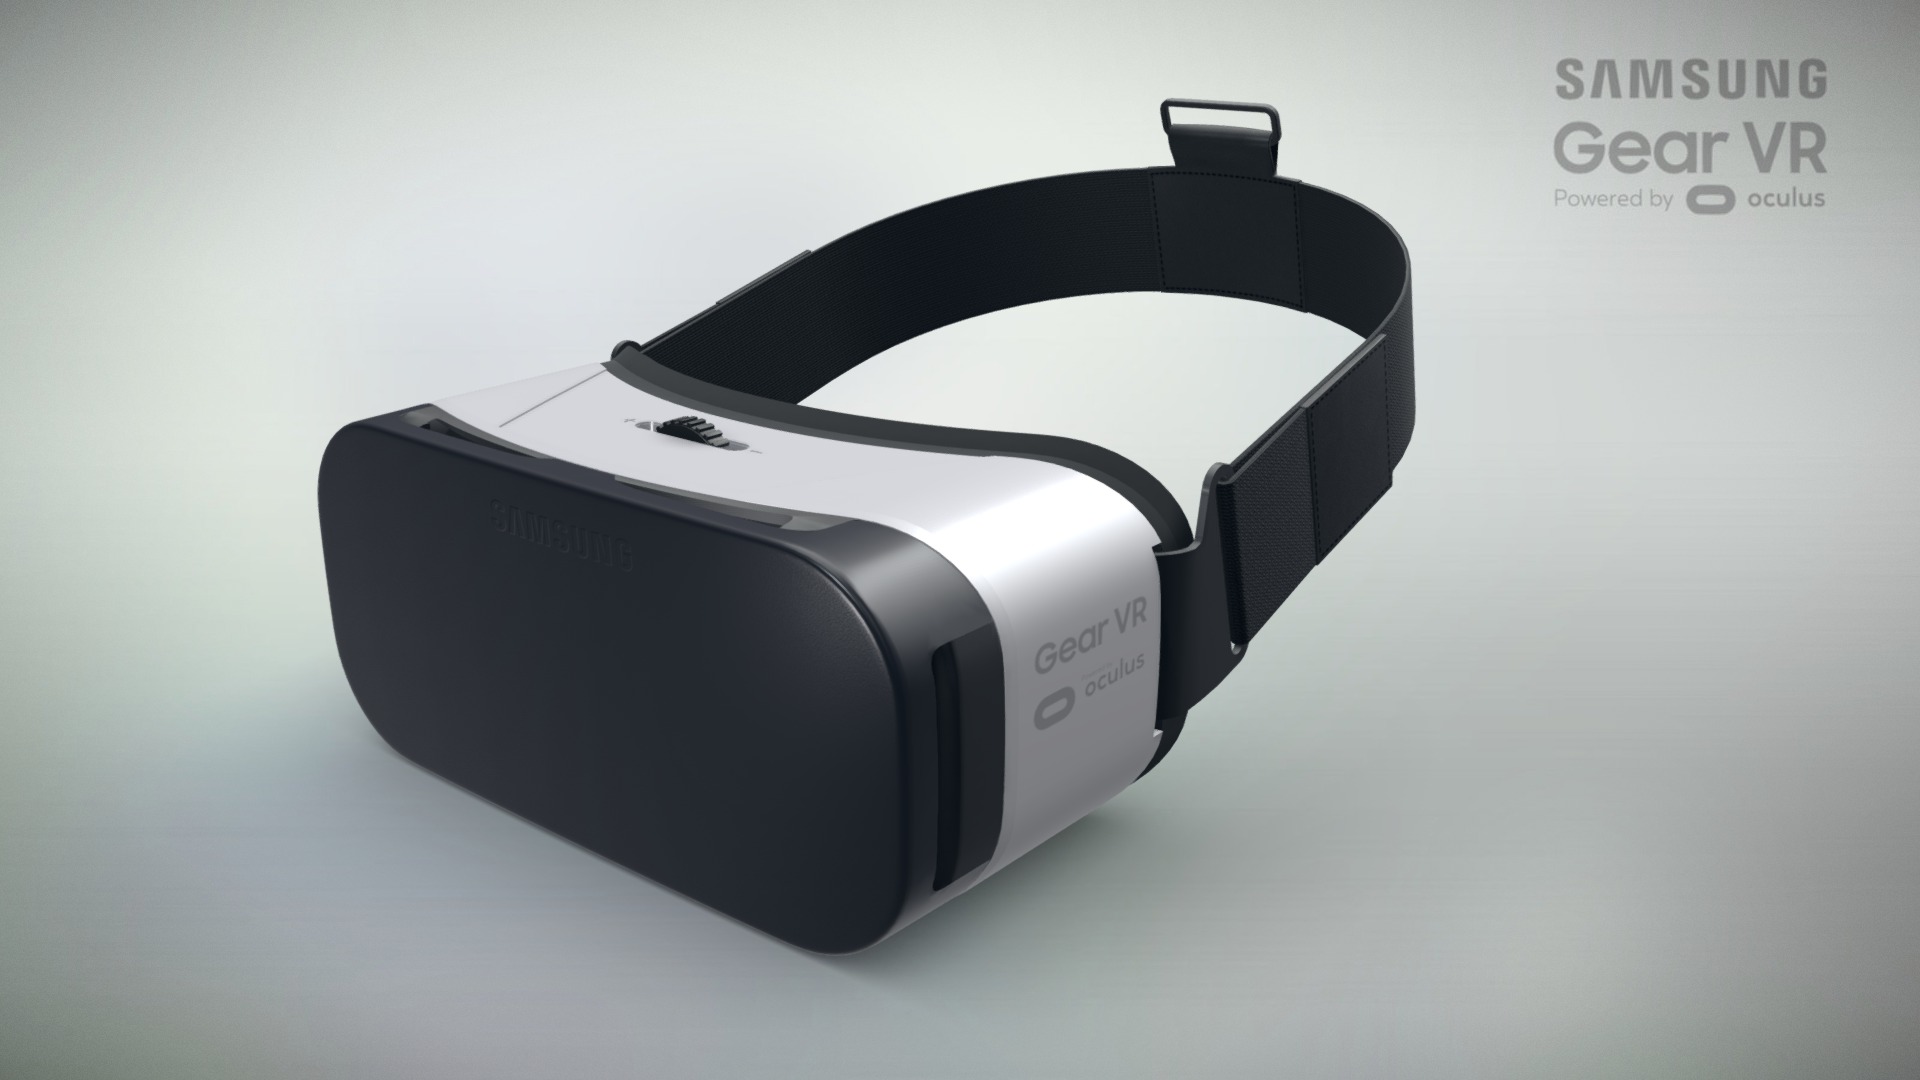 3D model Samsung Gear VR - This is a 3D model of the Samsung Gear VR. The 3D model is about a black and silver electronic device.